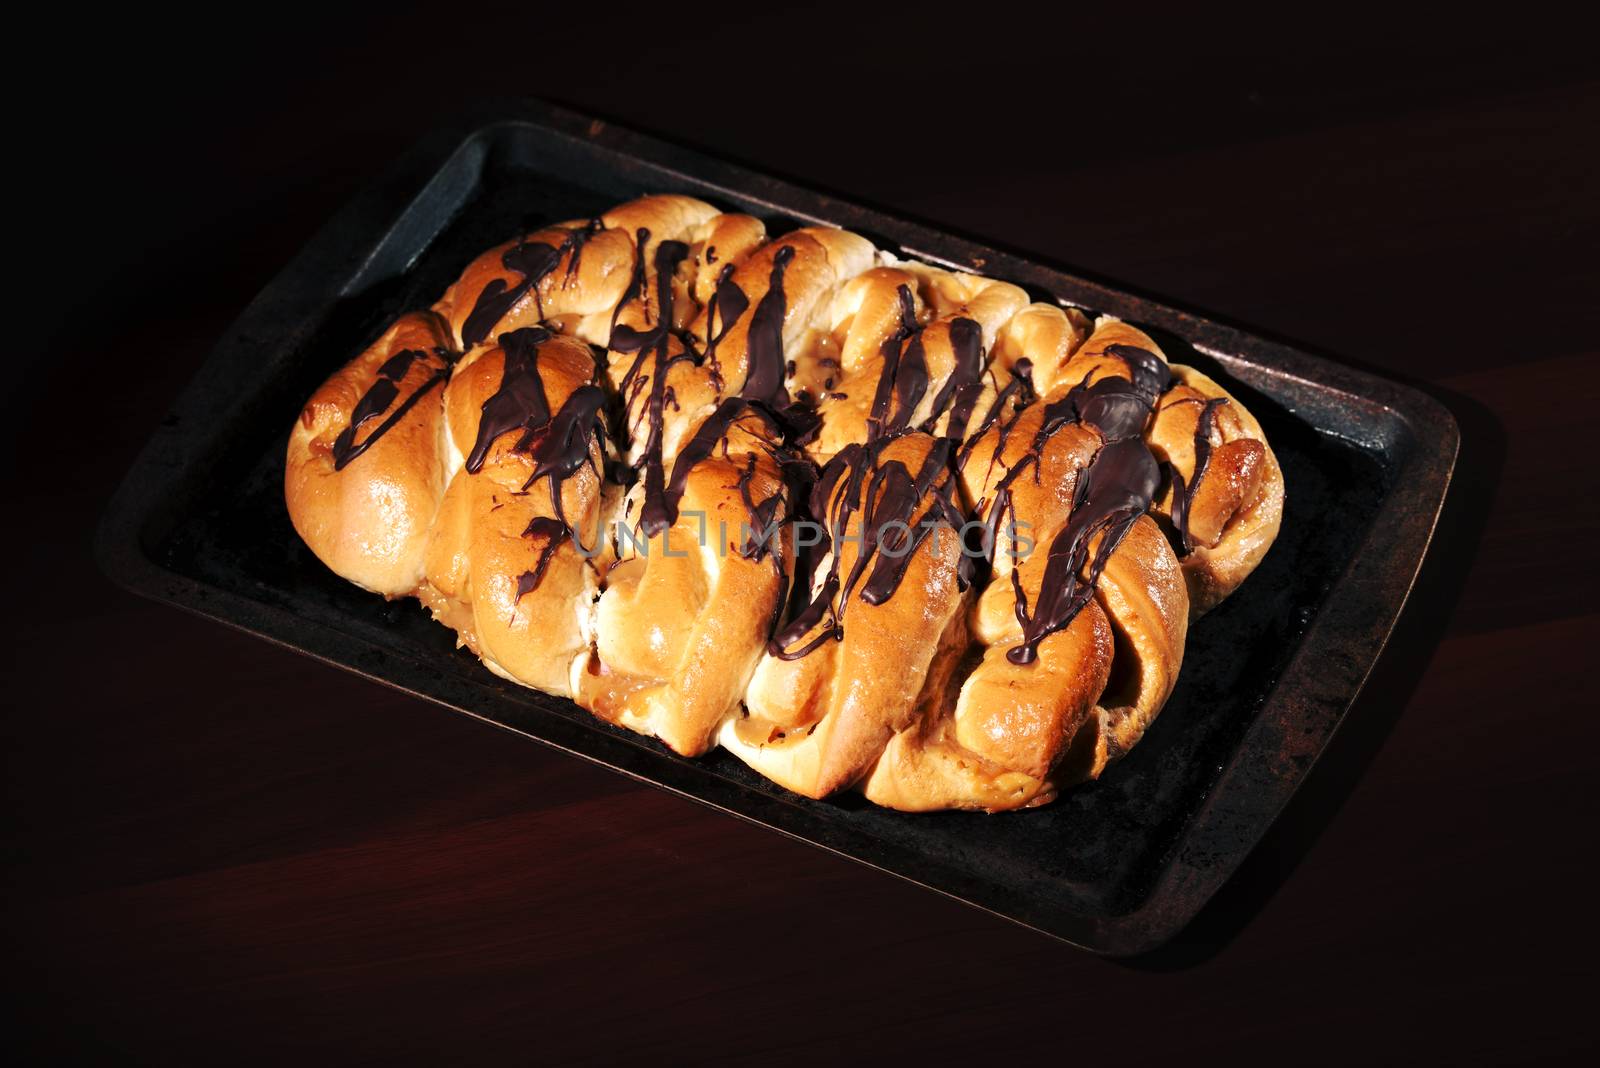 Chocolate and caramel danish pastry  by artistrobd